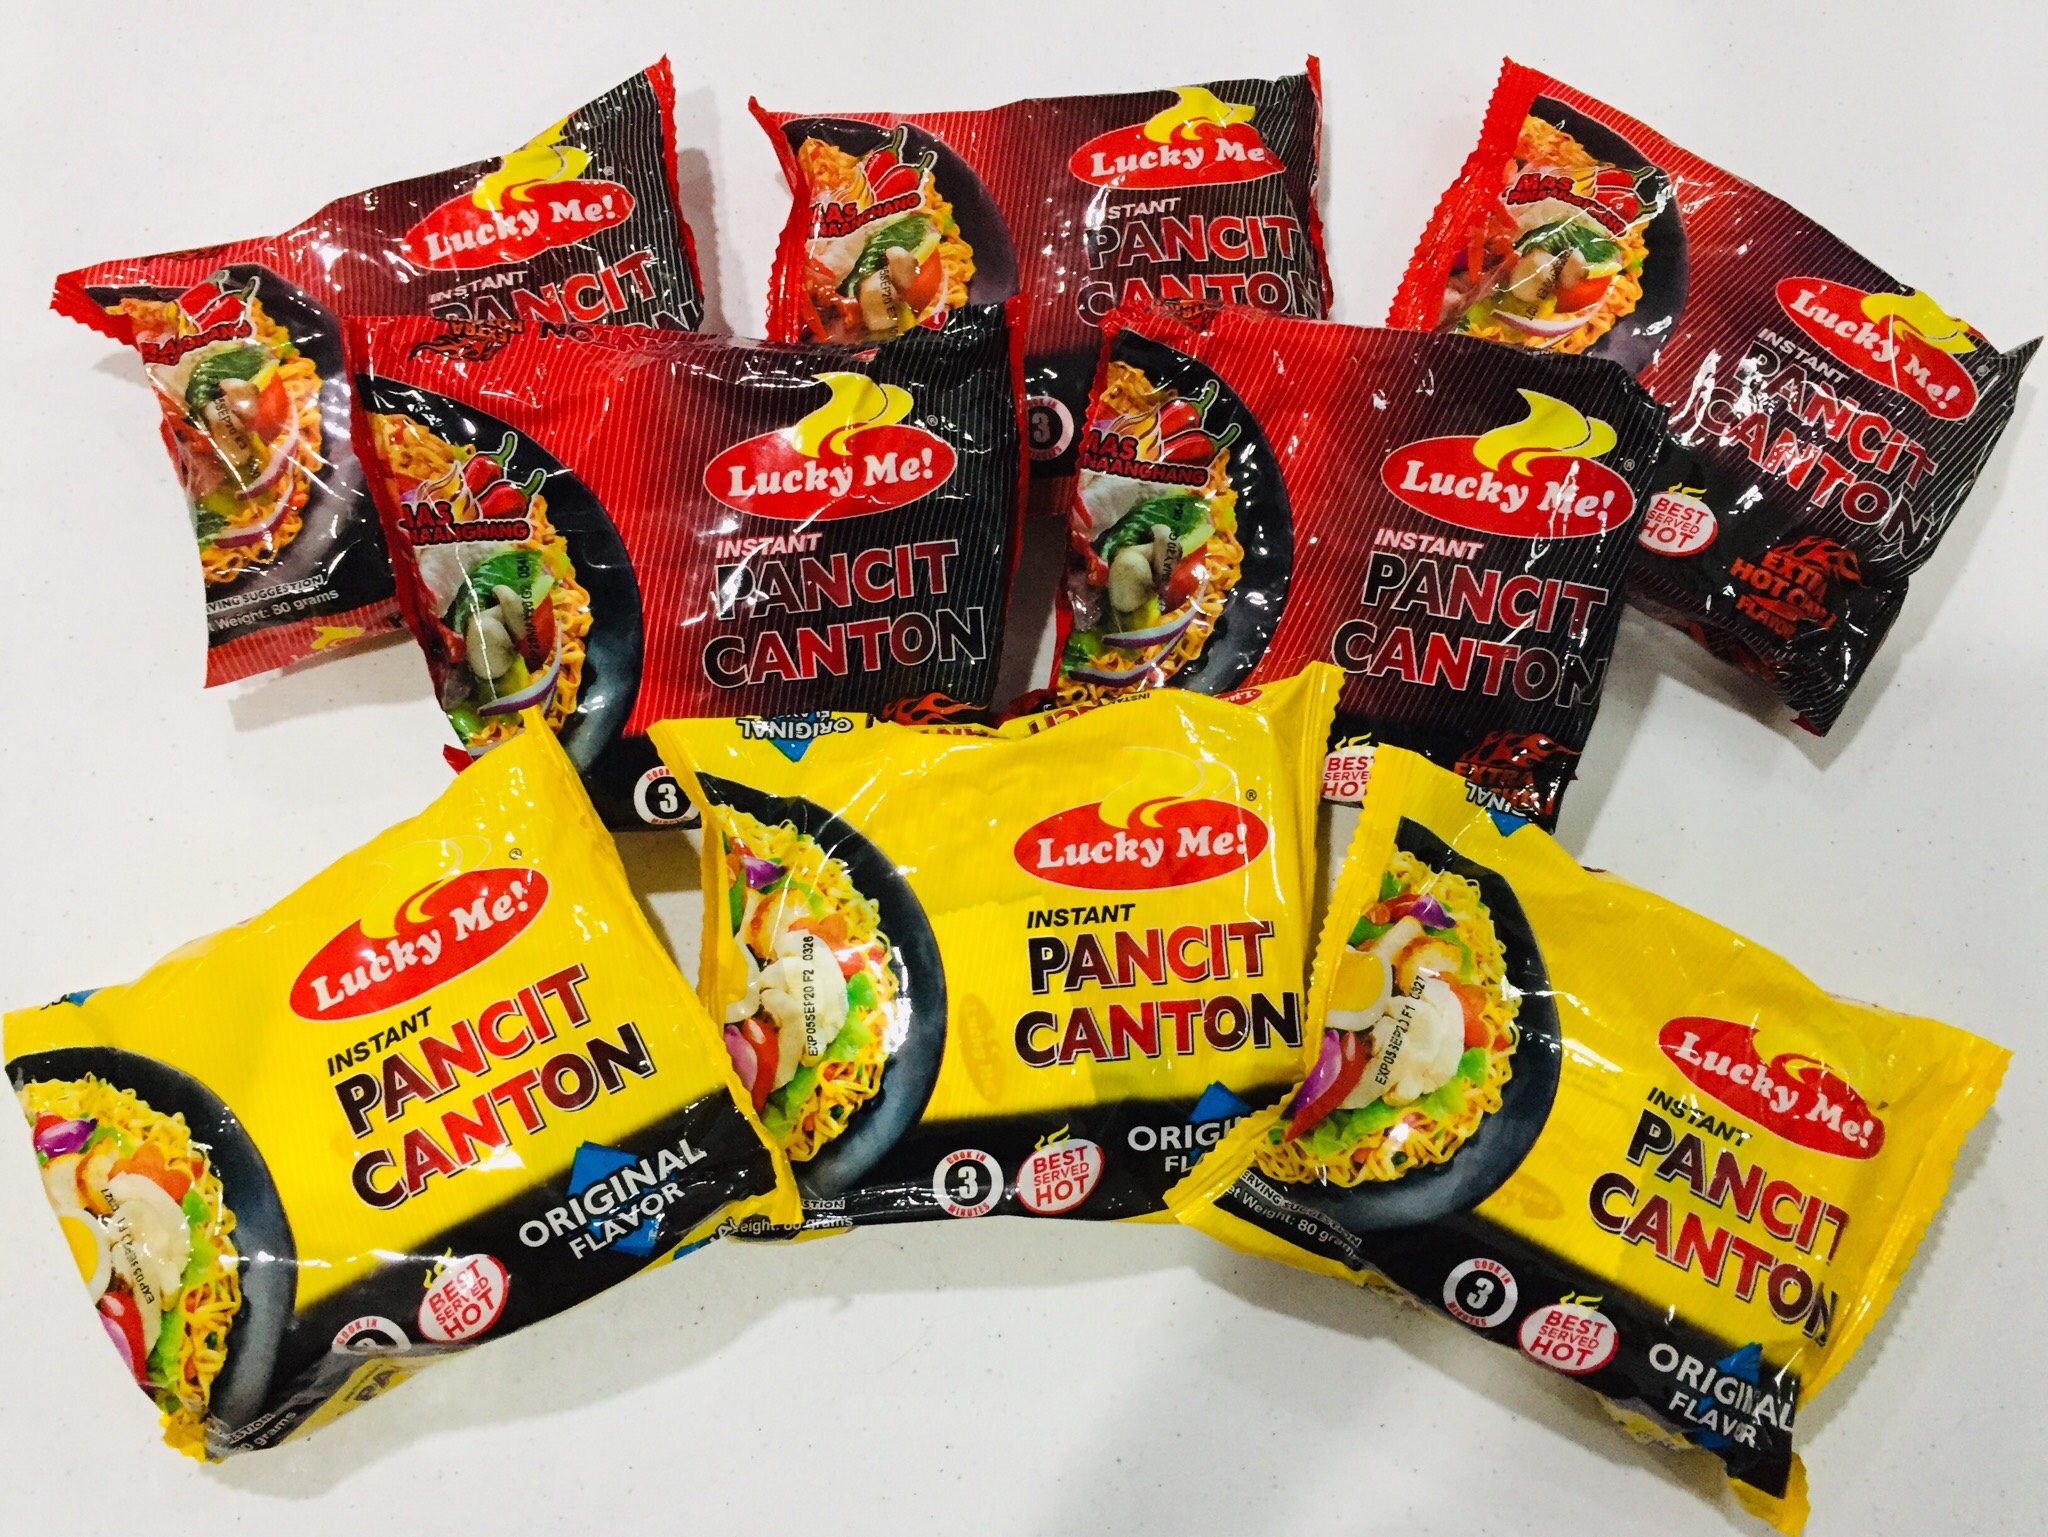 Lucky Me! maker Monde Nissin targets P63 billion in Philippines’ largest IPO